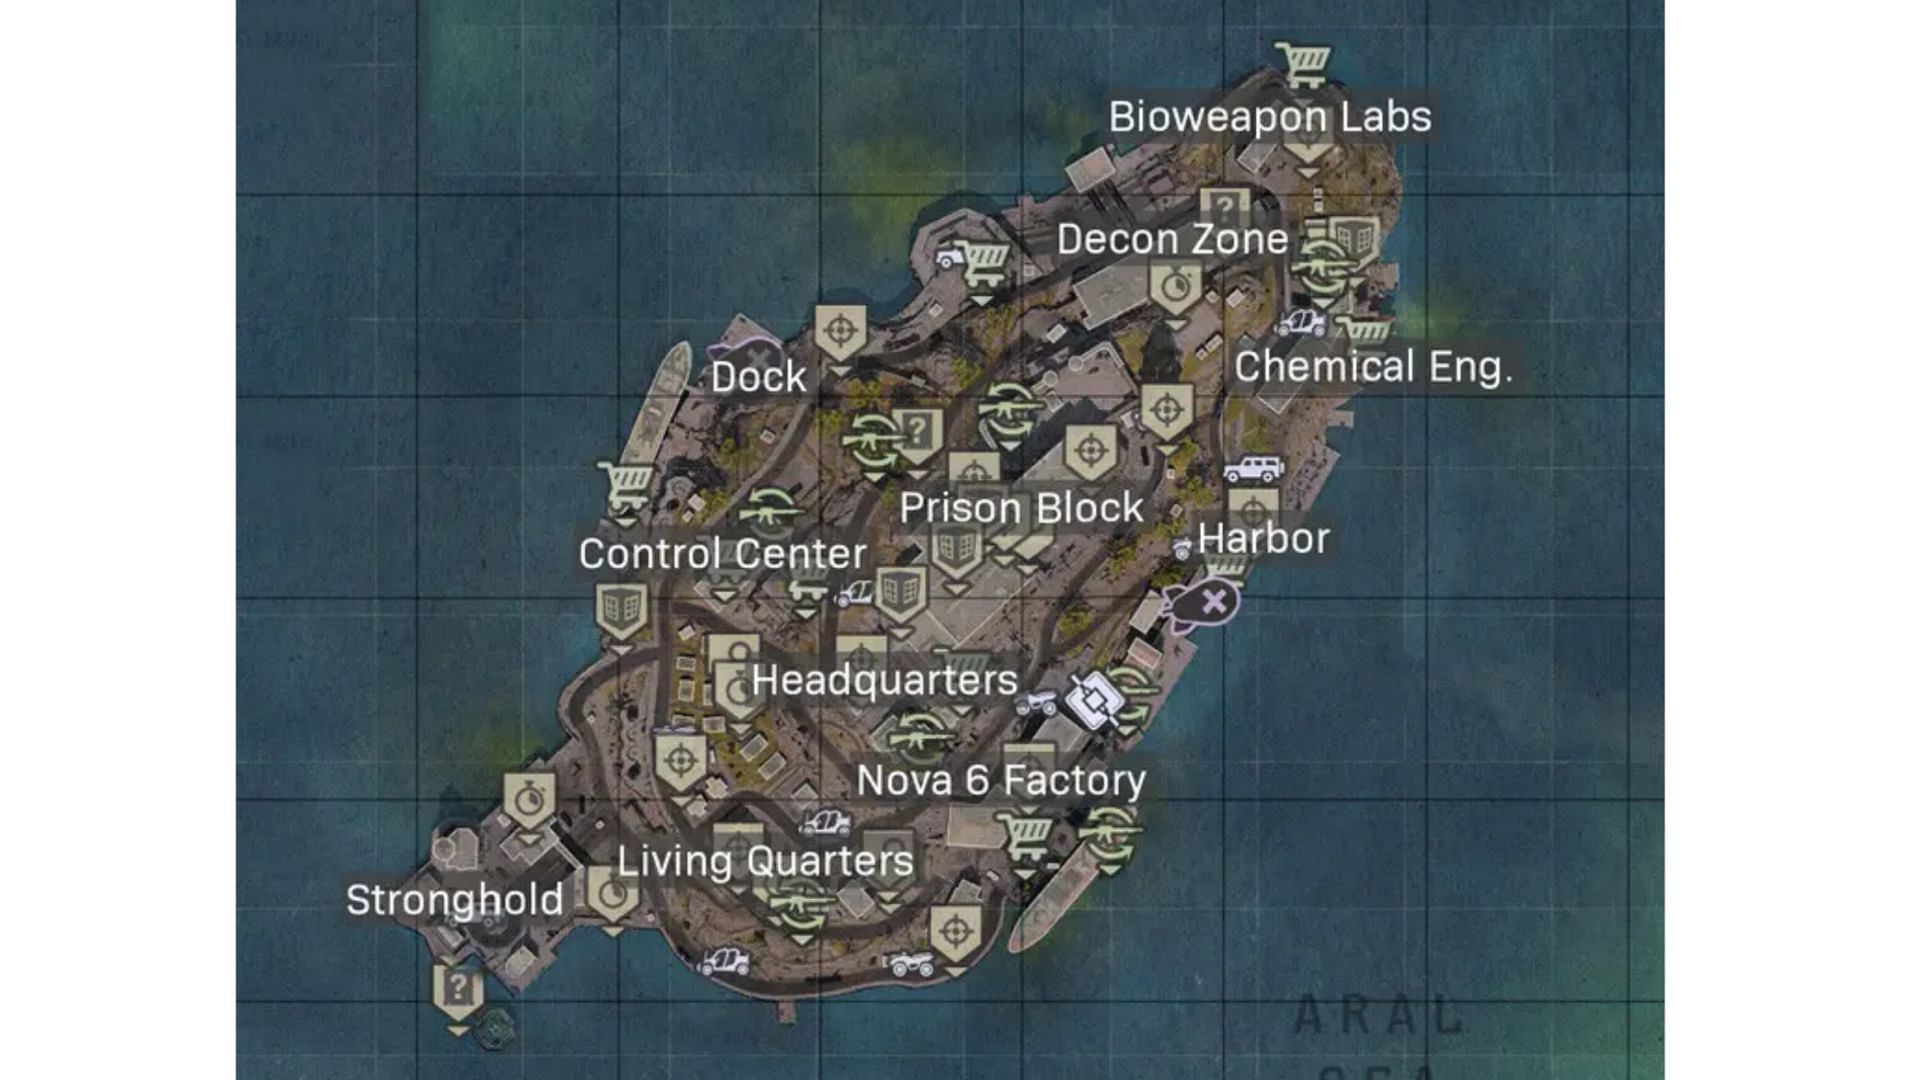 Call of Duty Warzone Rebirth Island guide: the best places to drop and loot